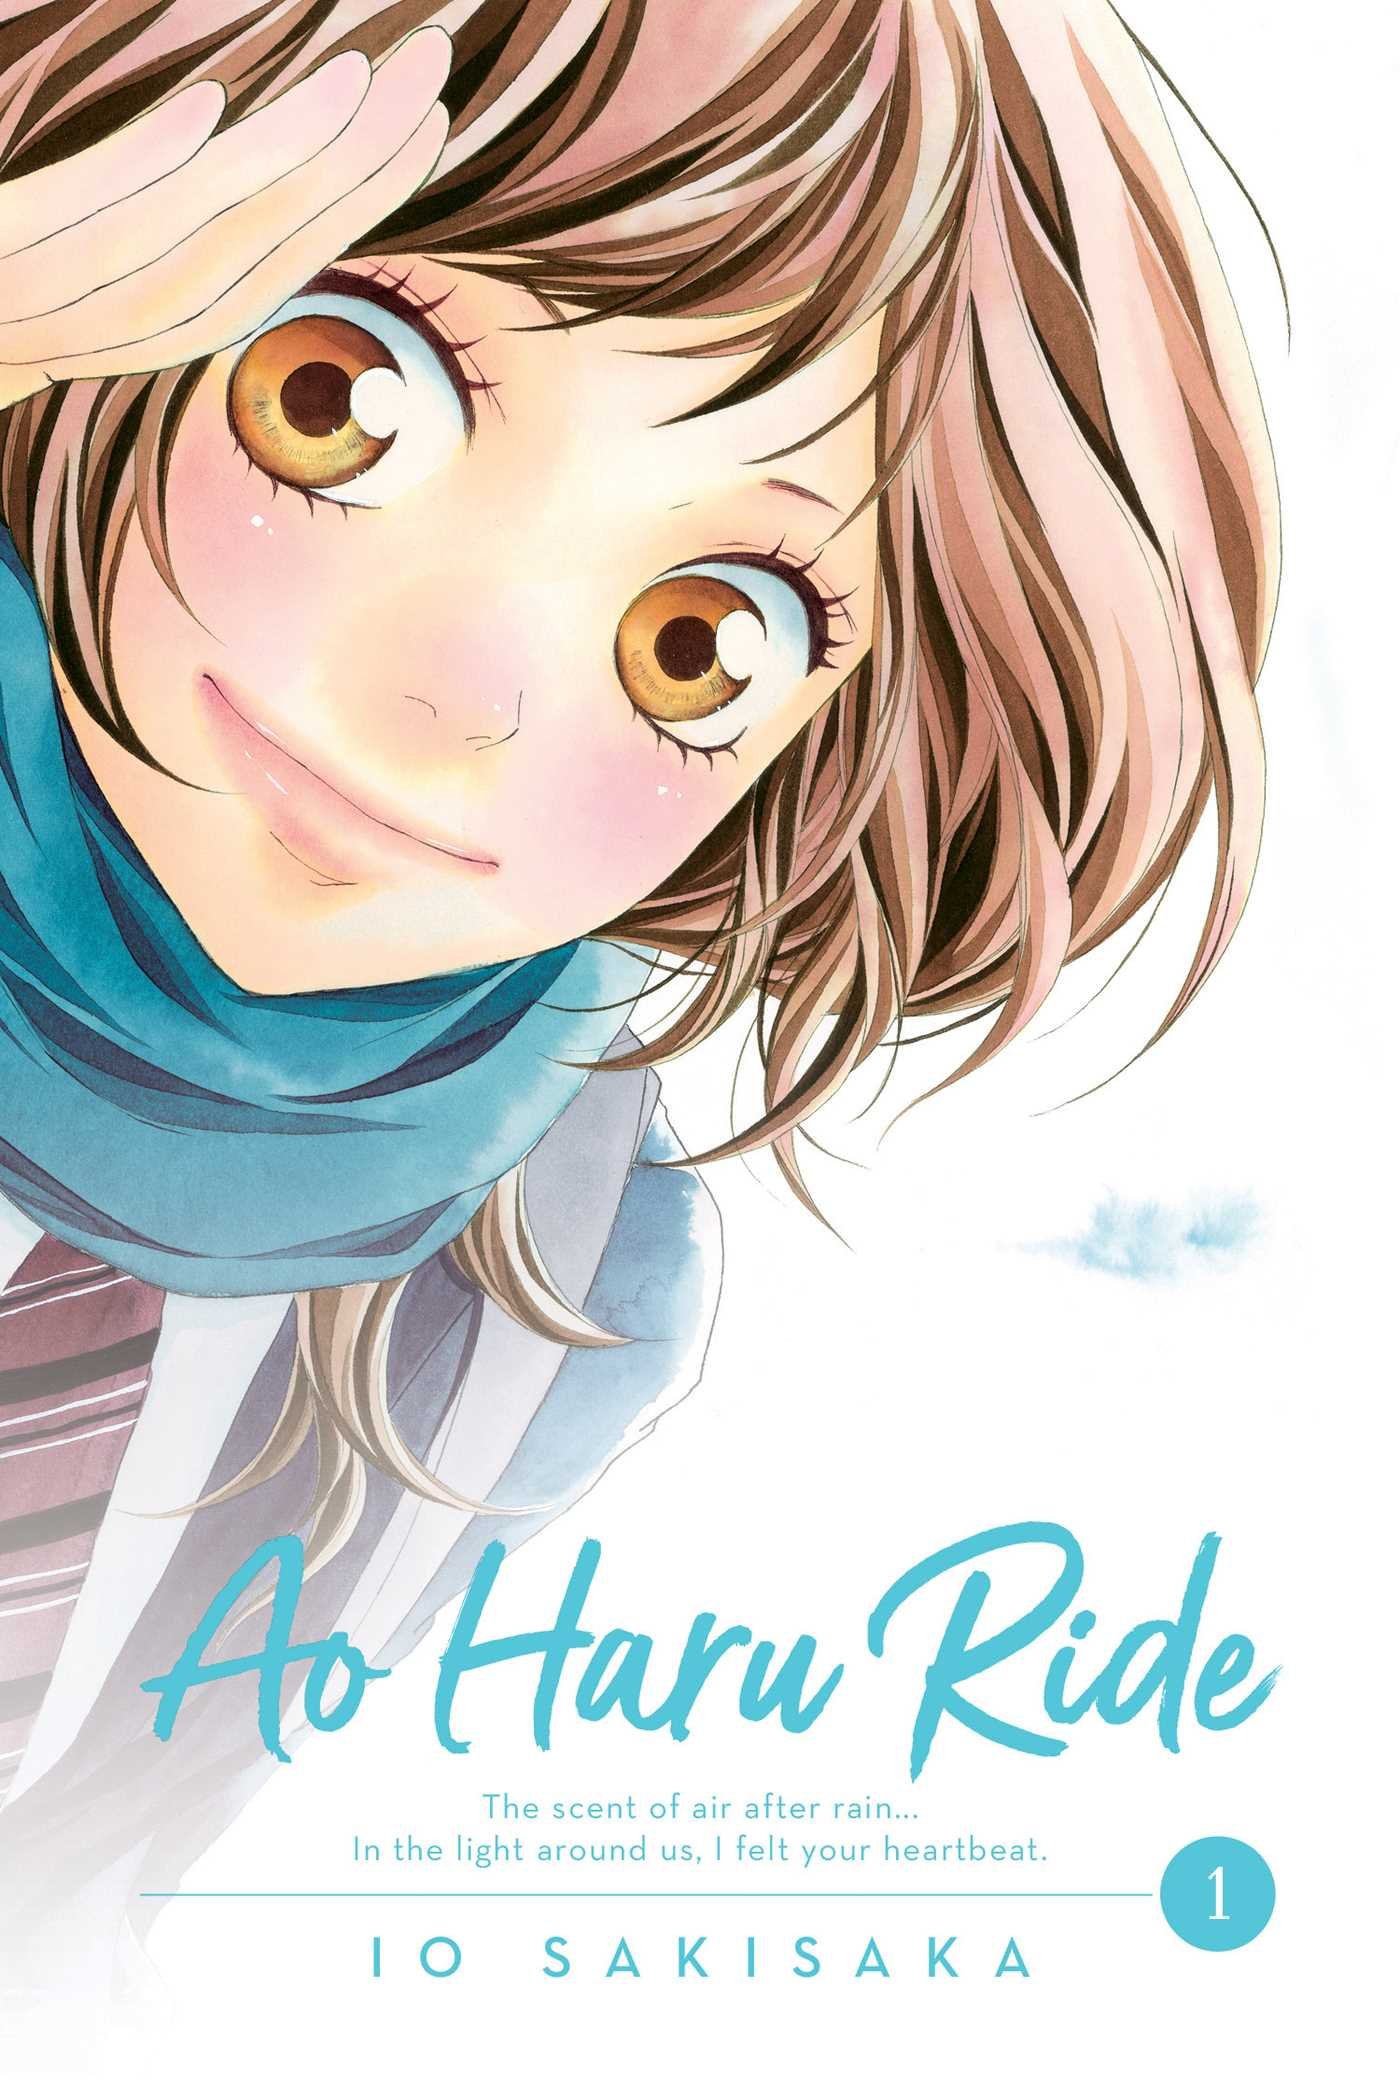 First Look-Ao Haru Ride + Episode 2-3 Anime Review